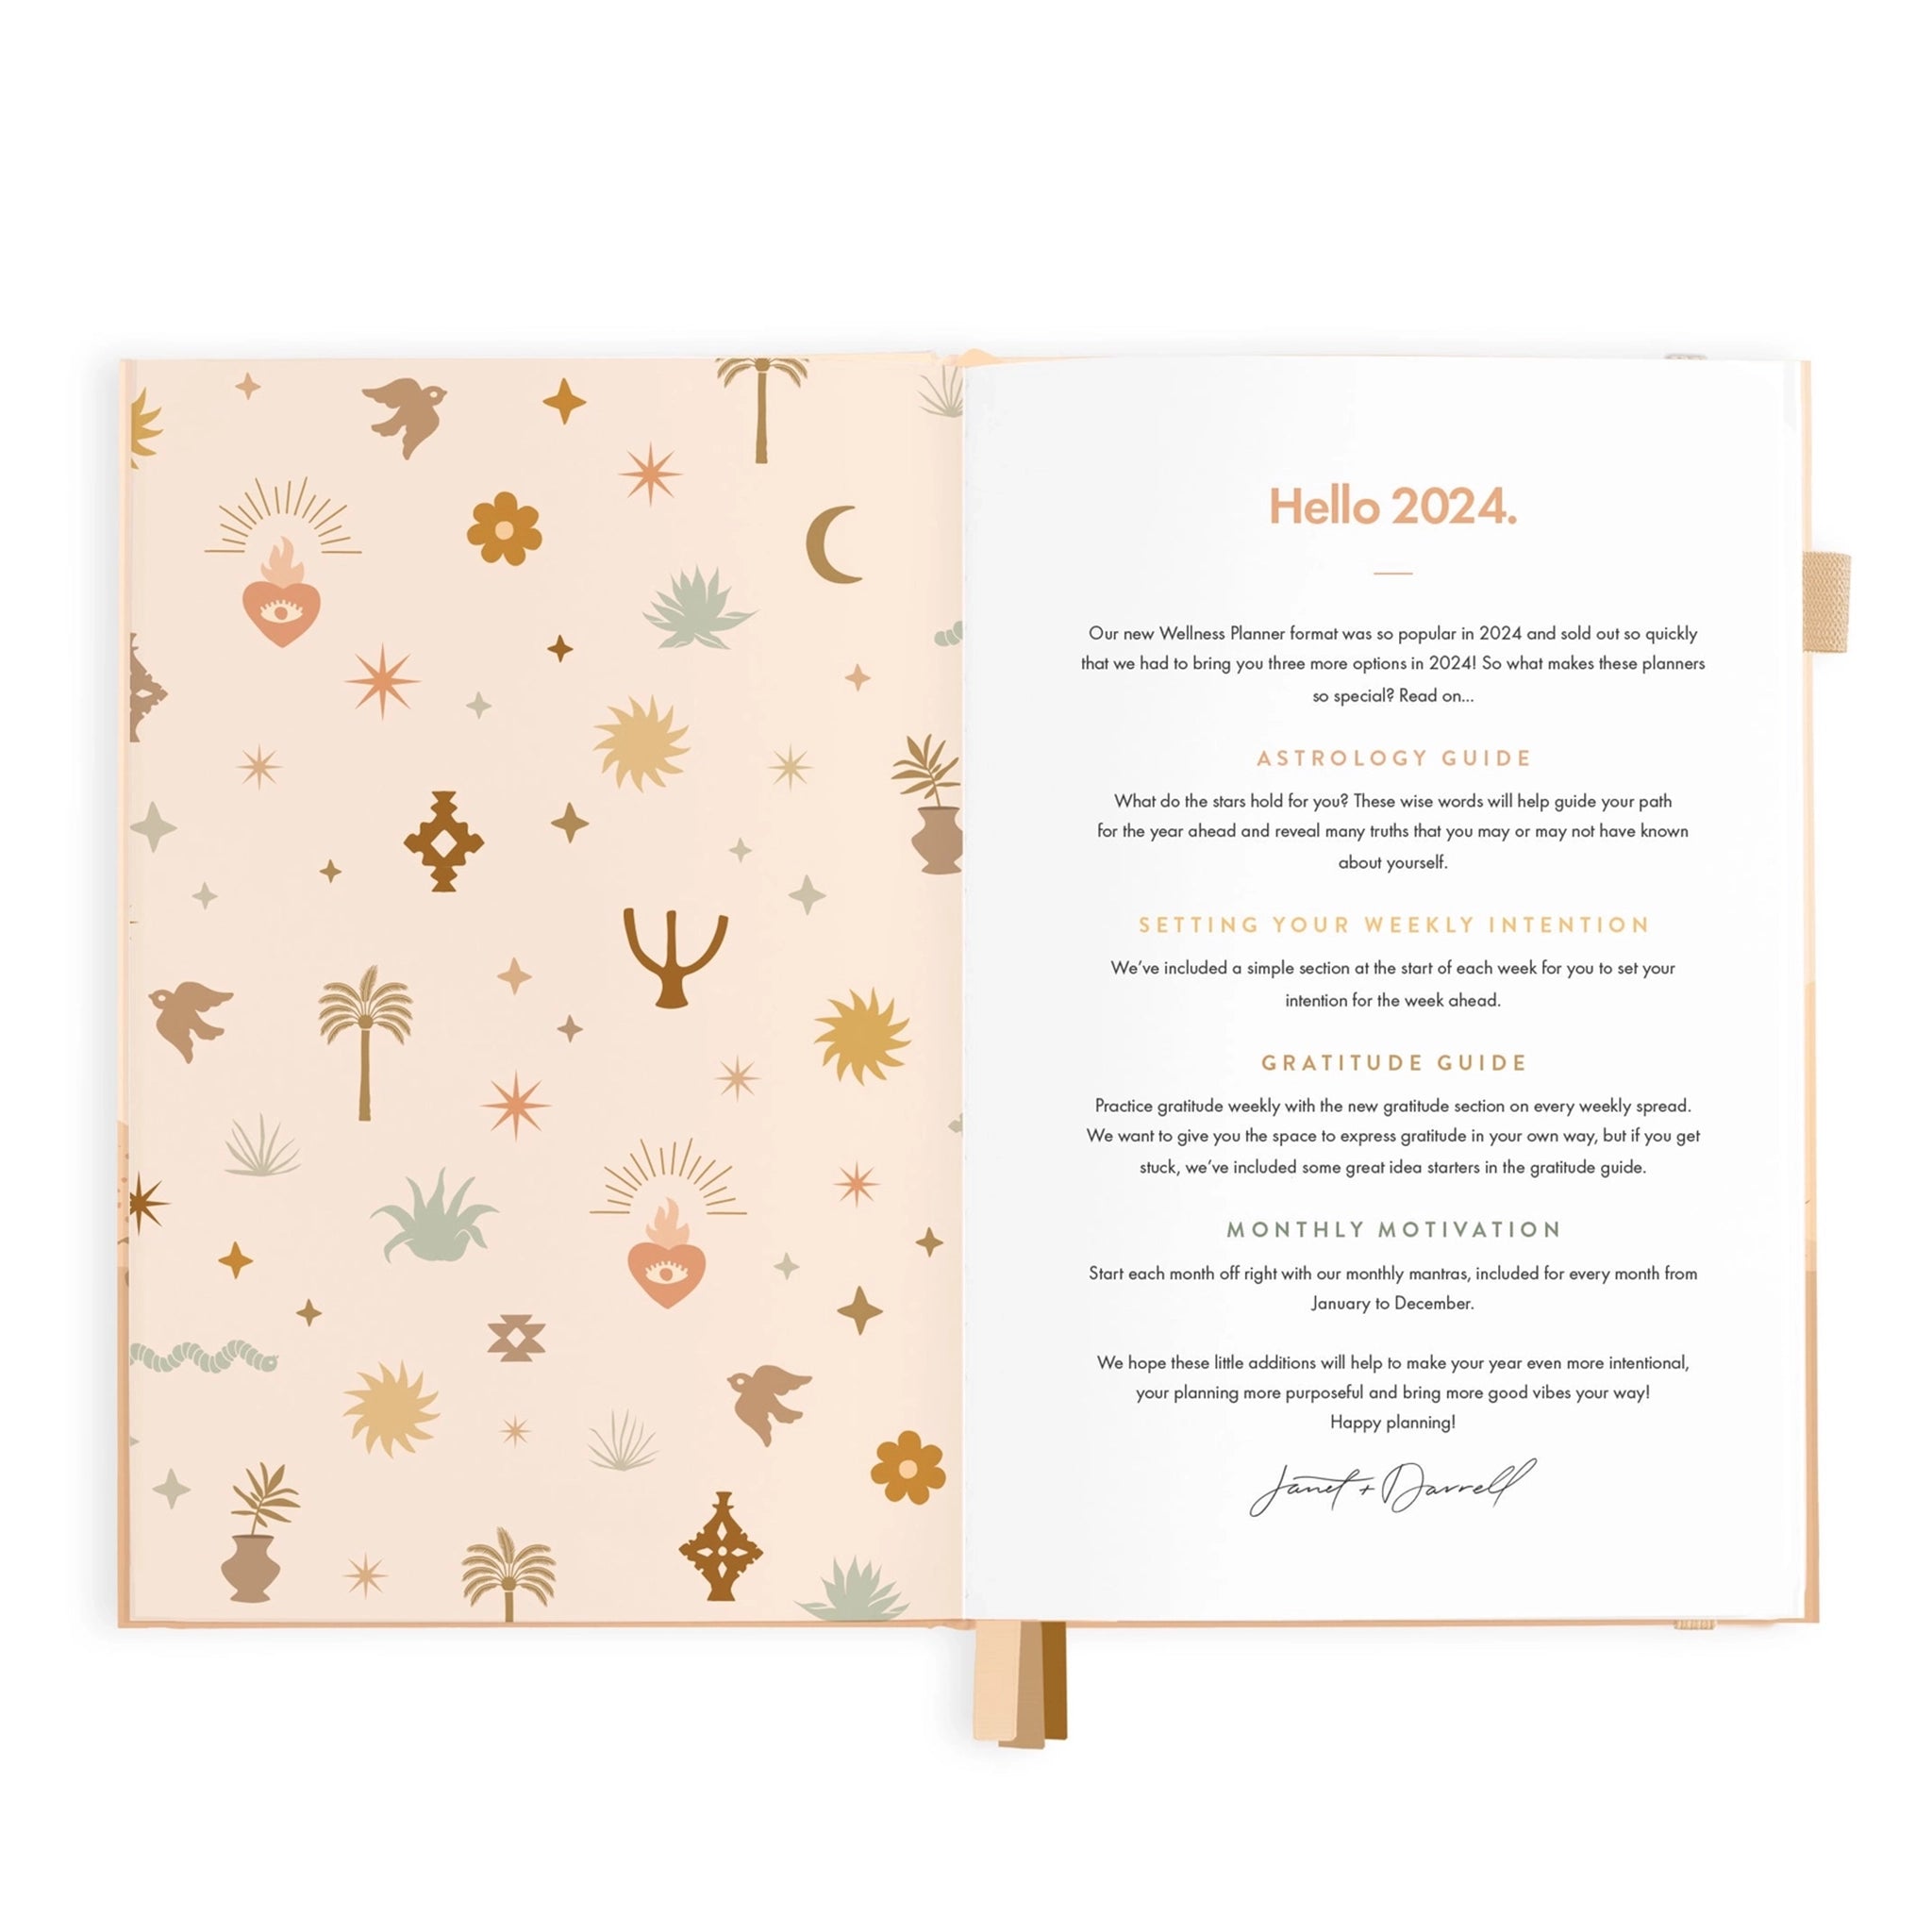 On a white background is the tan and peach planner opened to the front page that says, &quot;Hello 2024&quot; and what is included inside besides the planner which is an Astrology Guide, Setting a Weekly Intention, Gratitude Guide, and Monthly Motivation.